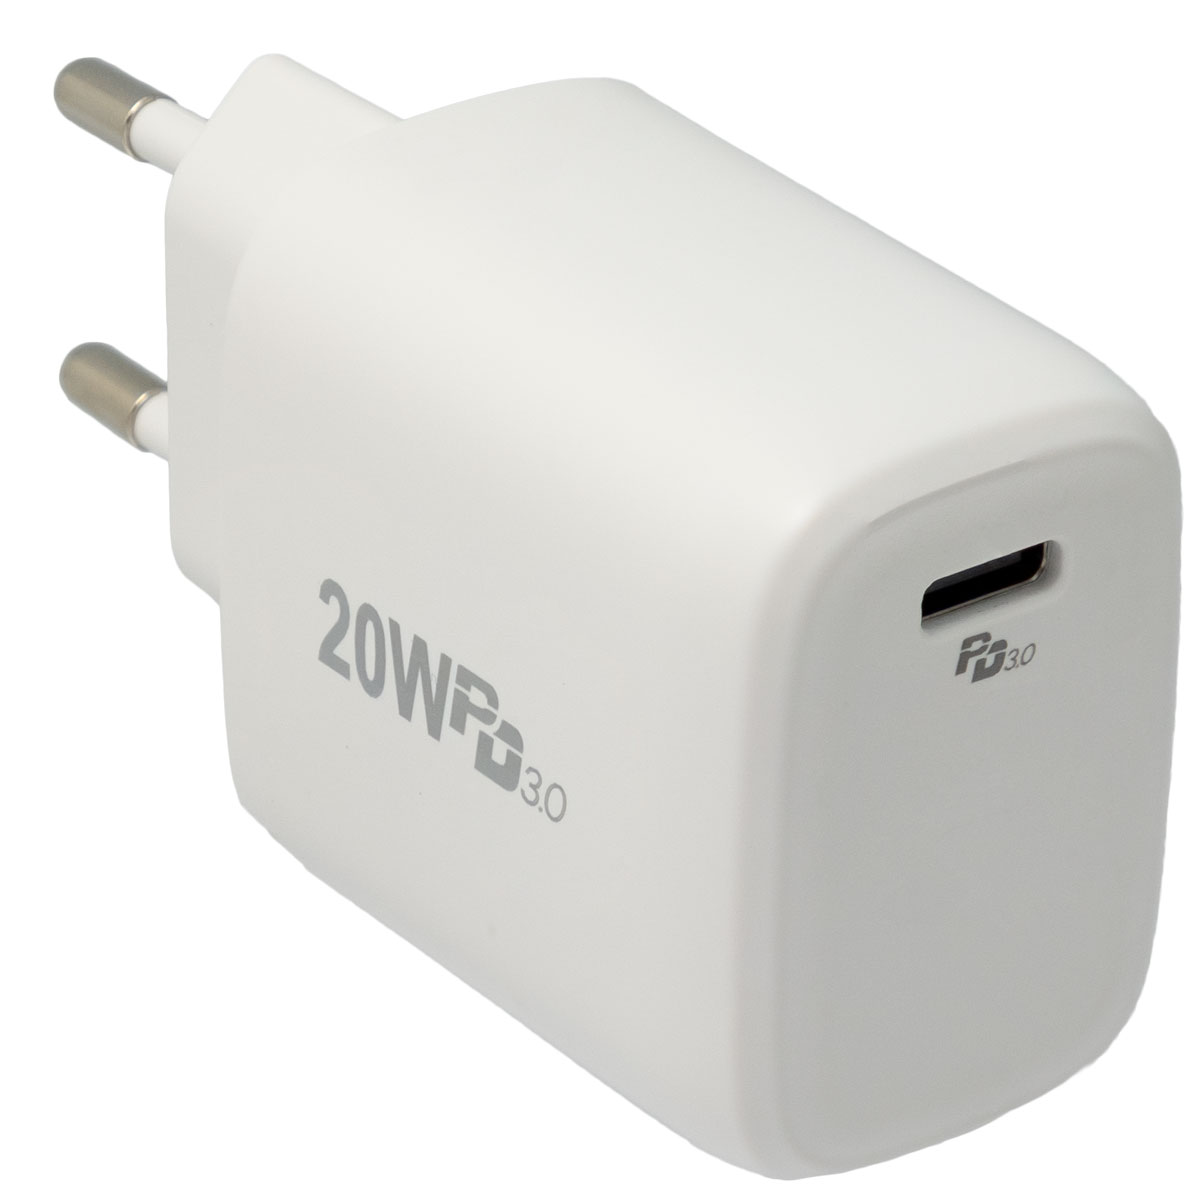 USB-C wall plug charger 20W with Power Delivery (PD), White